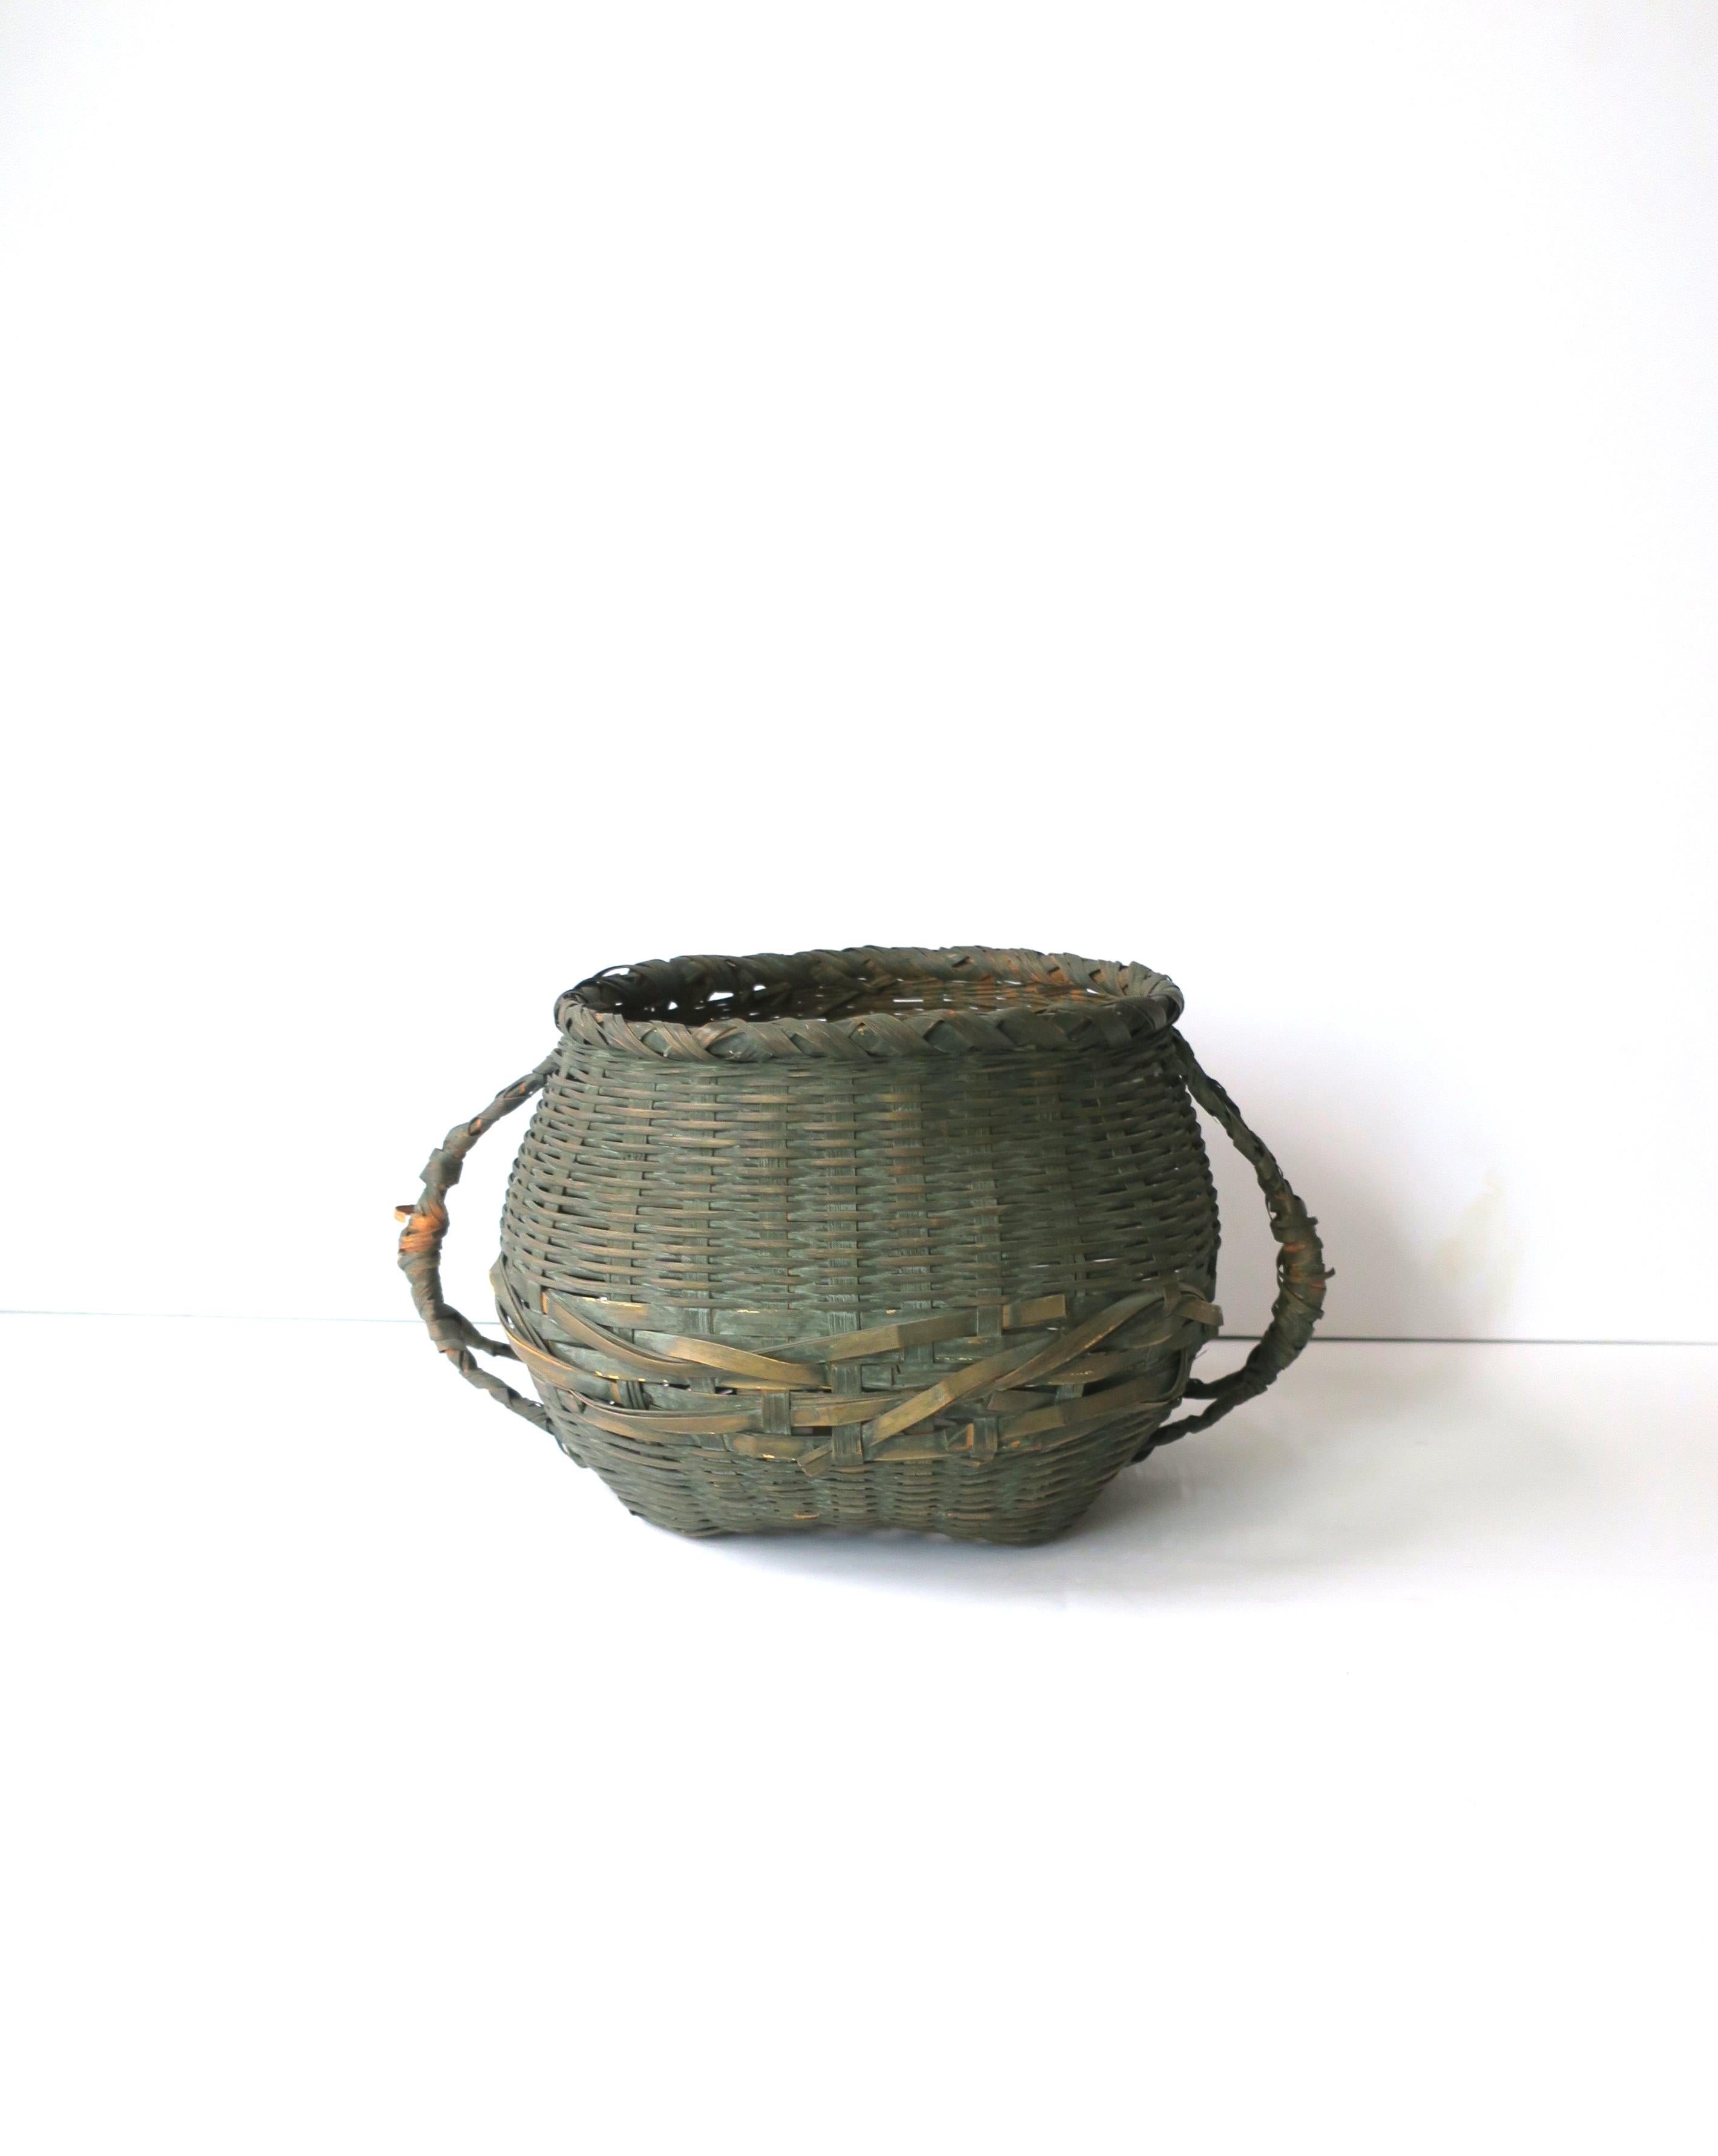 An antique wicker green splint basket with handles, circa early 20th century, USA. Dimensions: 9.5